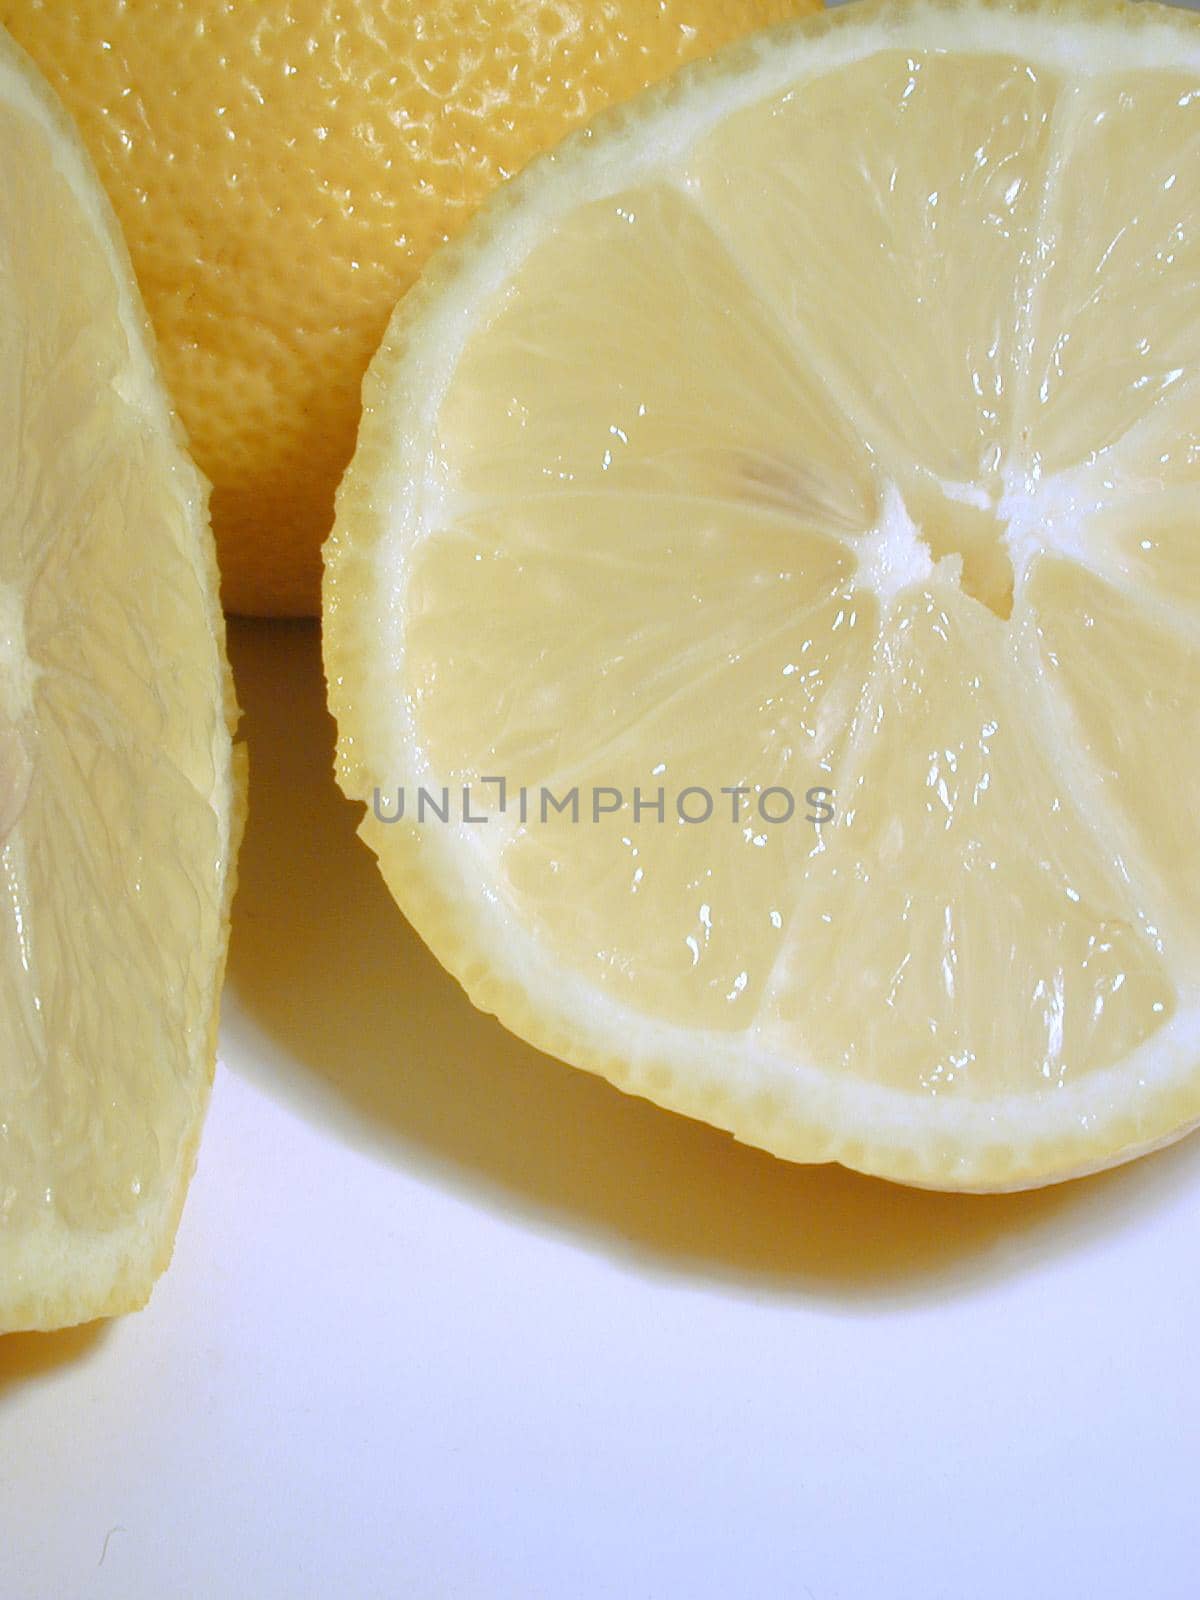 Sliced tangy fresh lemon rich in vitamin c used as a garnish and cooking ingredient for its sour taste